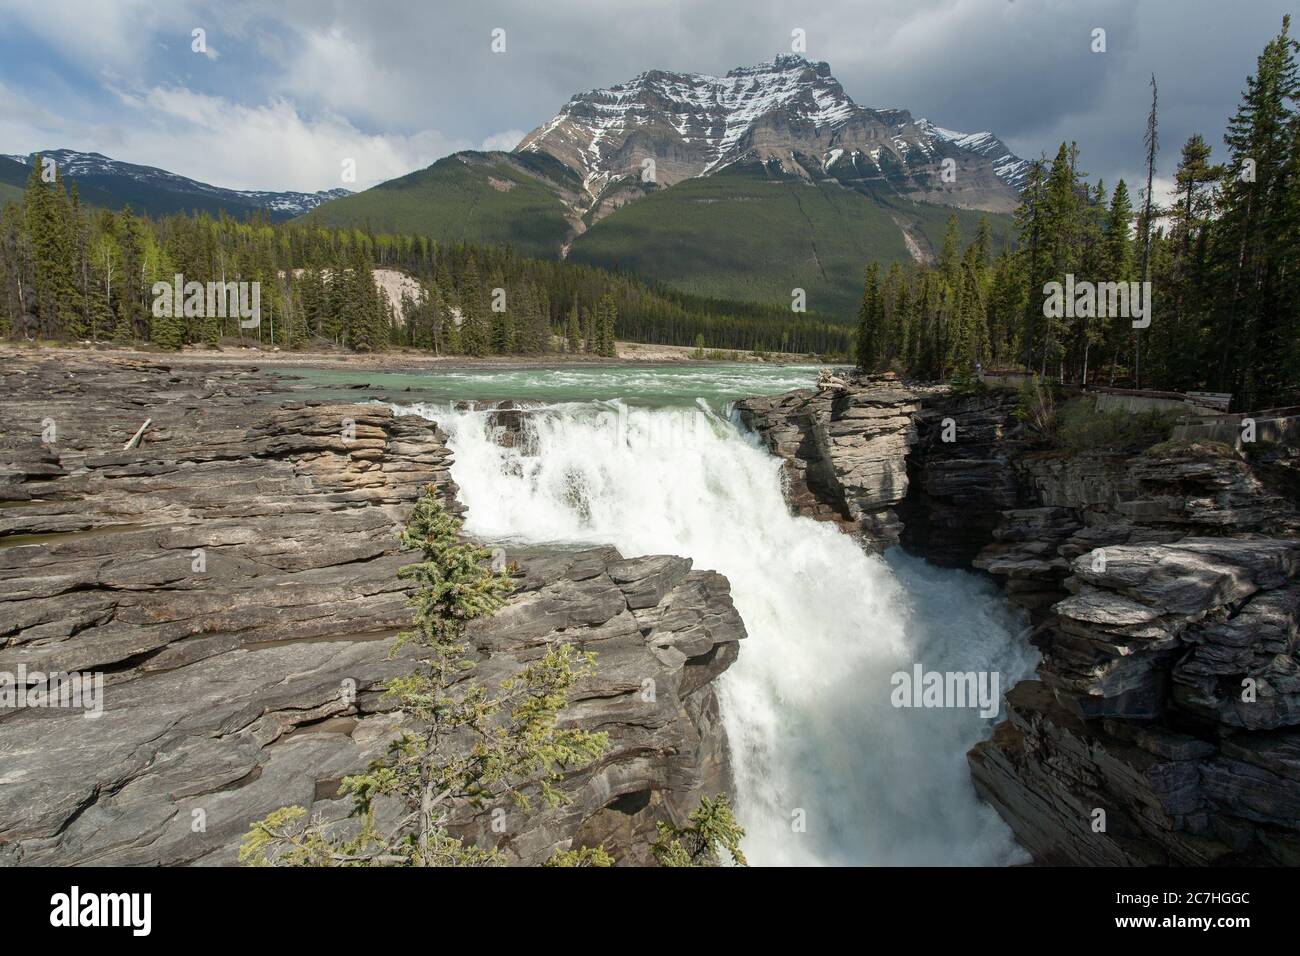 Beautiful shot of the Athabasca Falls surrounded by green trees in Alberta Canada Stock Photo